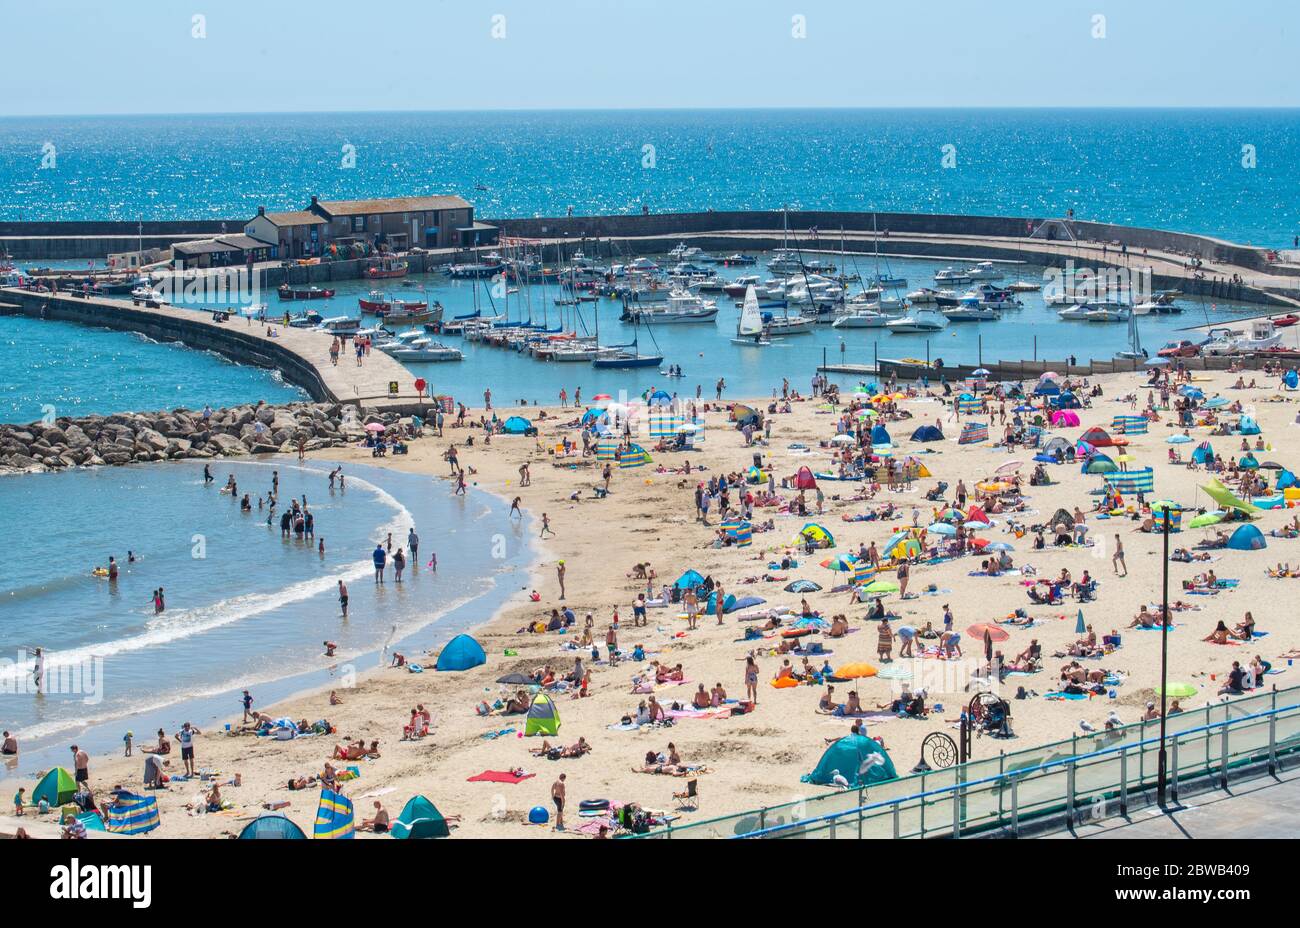 Lyme Regis, Dorset, UK. 31st May, 2020. UK Weather: Beachgoers flocked to the beach at Lyme Regis to bask in scorching hot afternoon sunshine on the hottest day of the year so far. Credit: Celia McMahon/Alamy Live News Stock Photo